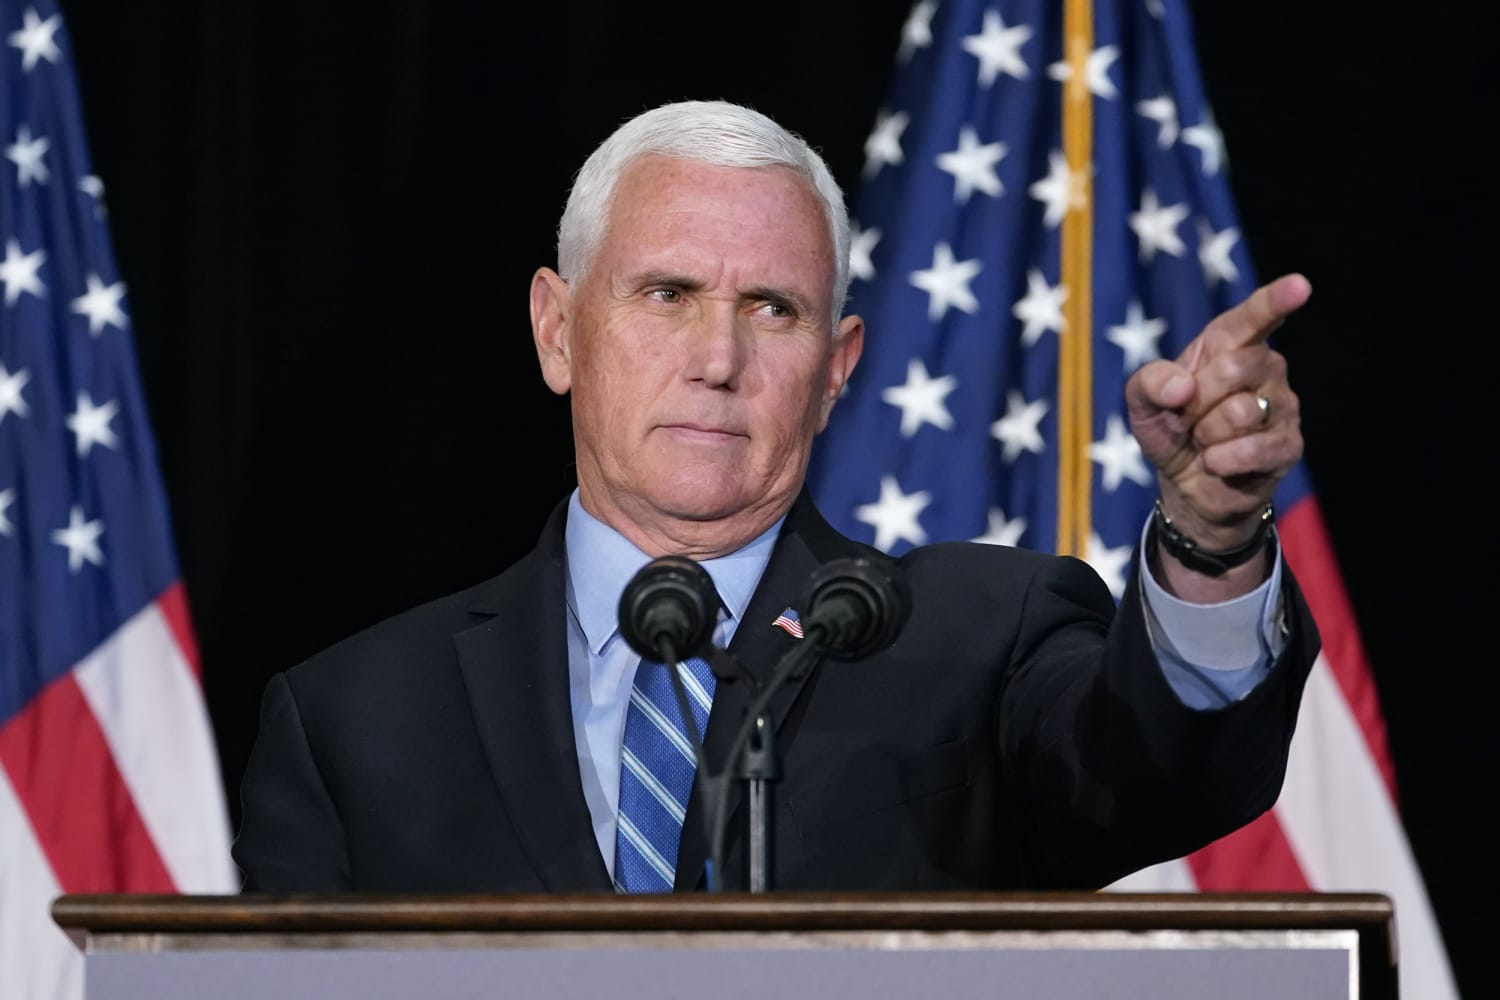 Pence delivers campaign-like speech on schools as 2024 speculation mounts